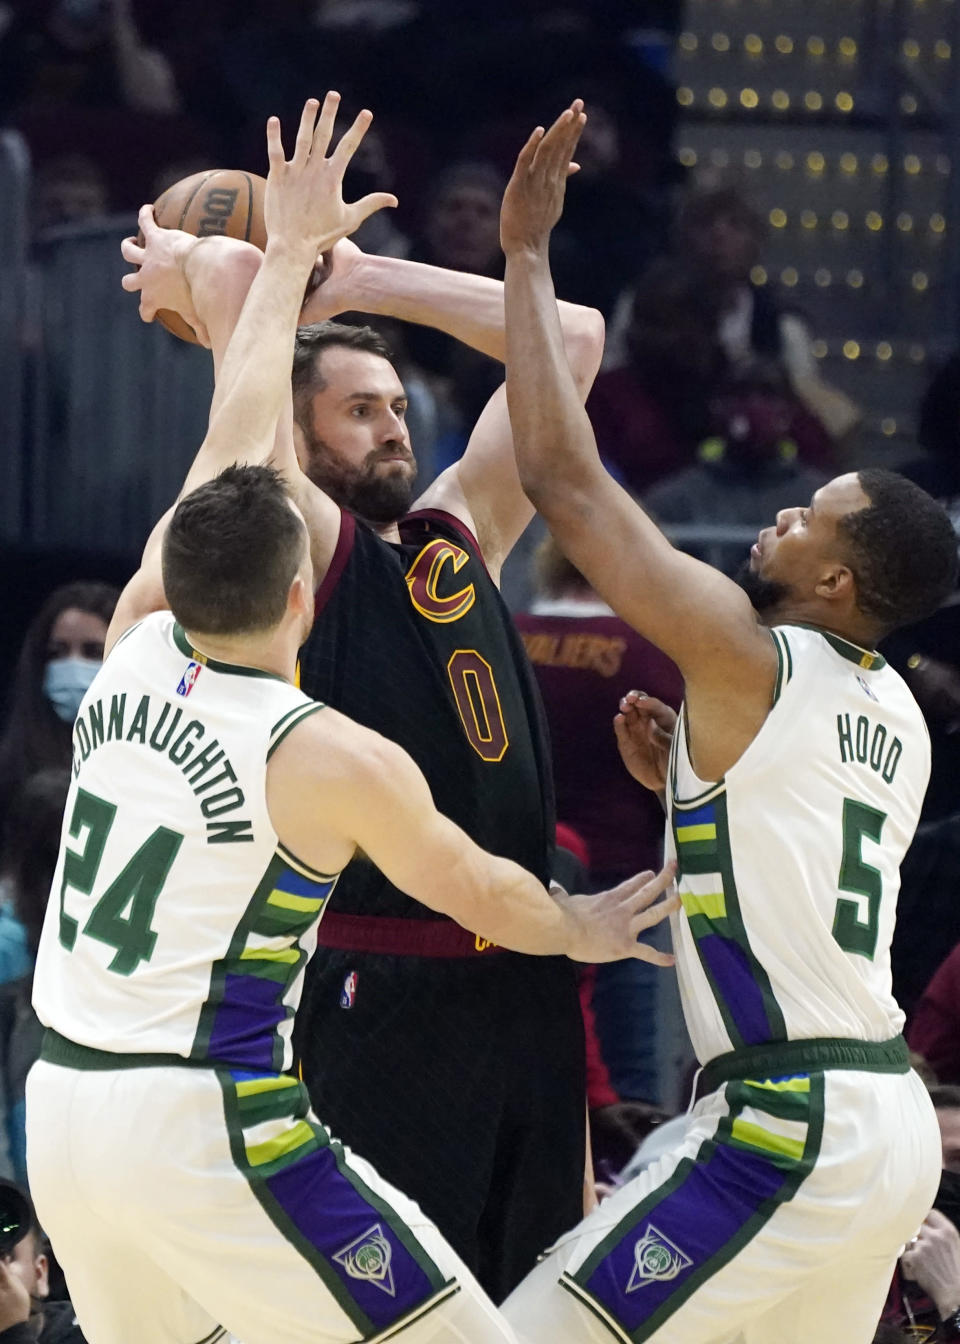 Cleveland Cavaliers' Kevin Love, center, passes as Milwaukee Bucks' Pat Connaughton, left, and Rodney Hood defend in the first half of an NBA basketball game, Wednesday, Jan. 26, 2022, in Cleveland. (AP Photo/Tony Dejak)